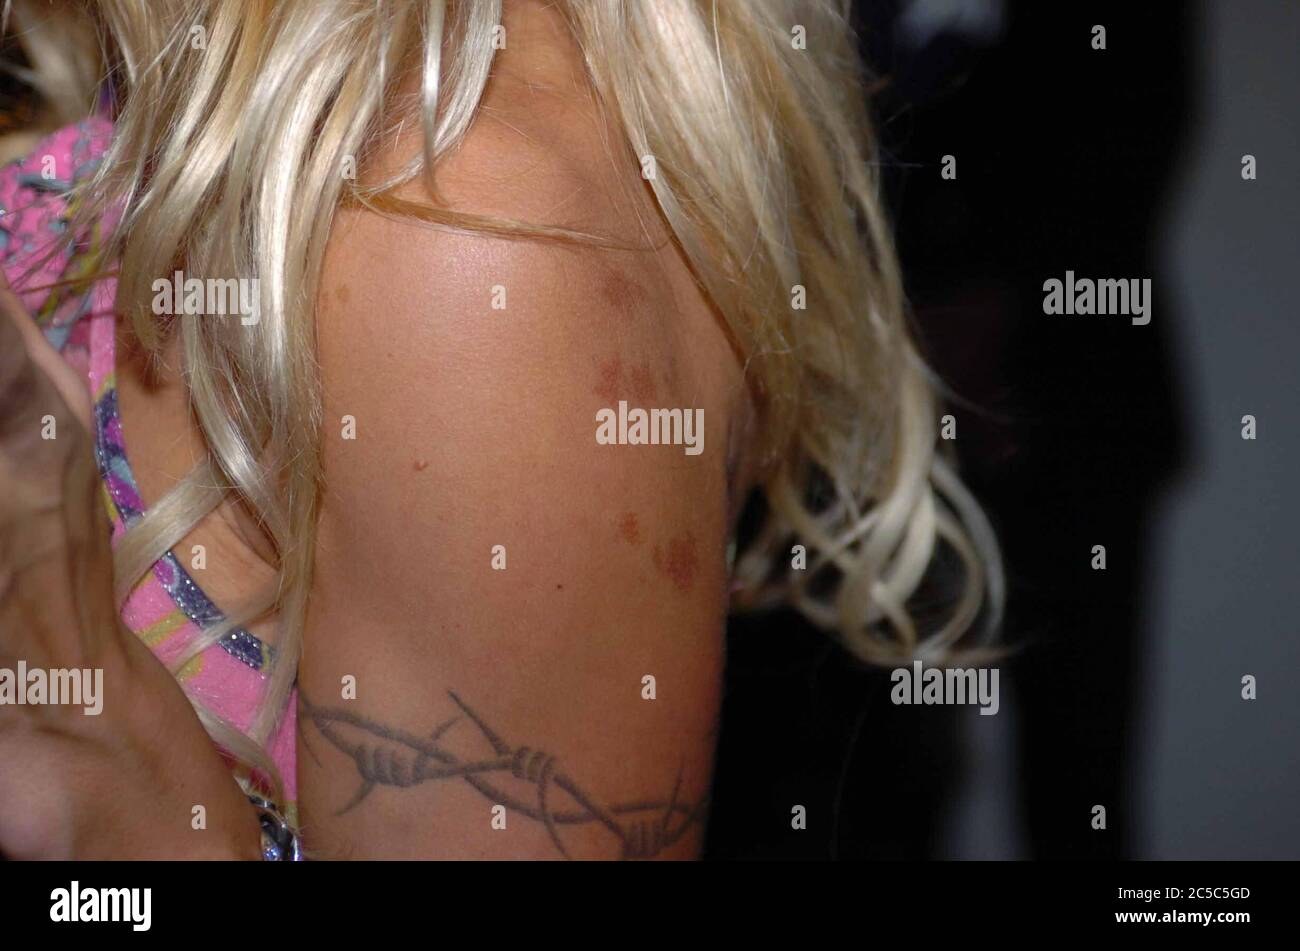 MIAMI BEACH, FL - FEBRUARY 19:  Pamela Anderson shows signs of brusing or cupping in South Beach on February 19, 2004 in Miami, Florida   People:  Pamela Anderson Stock Photo